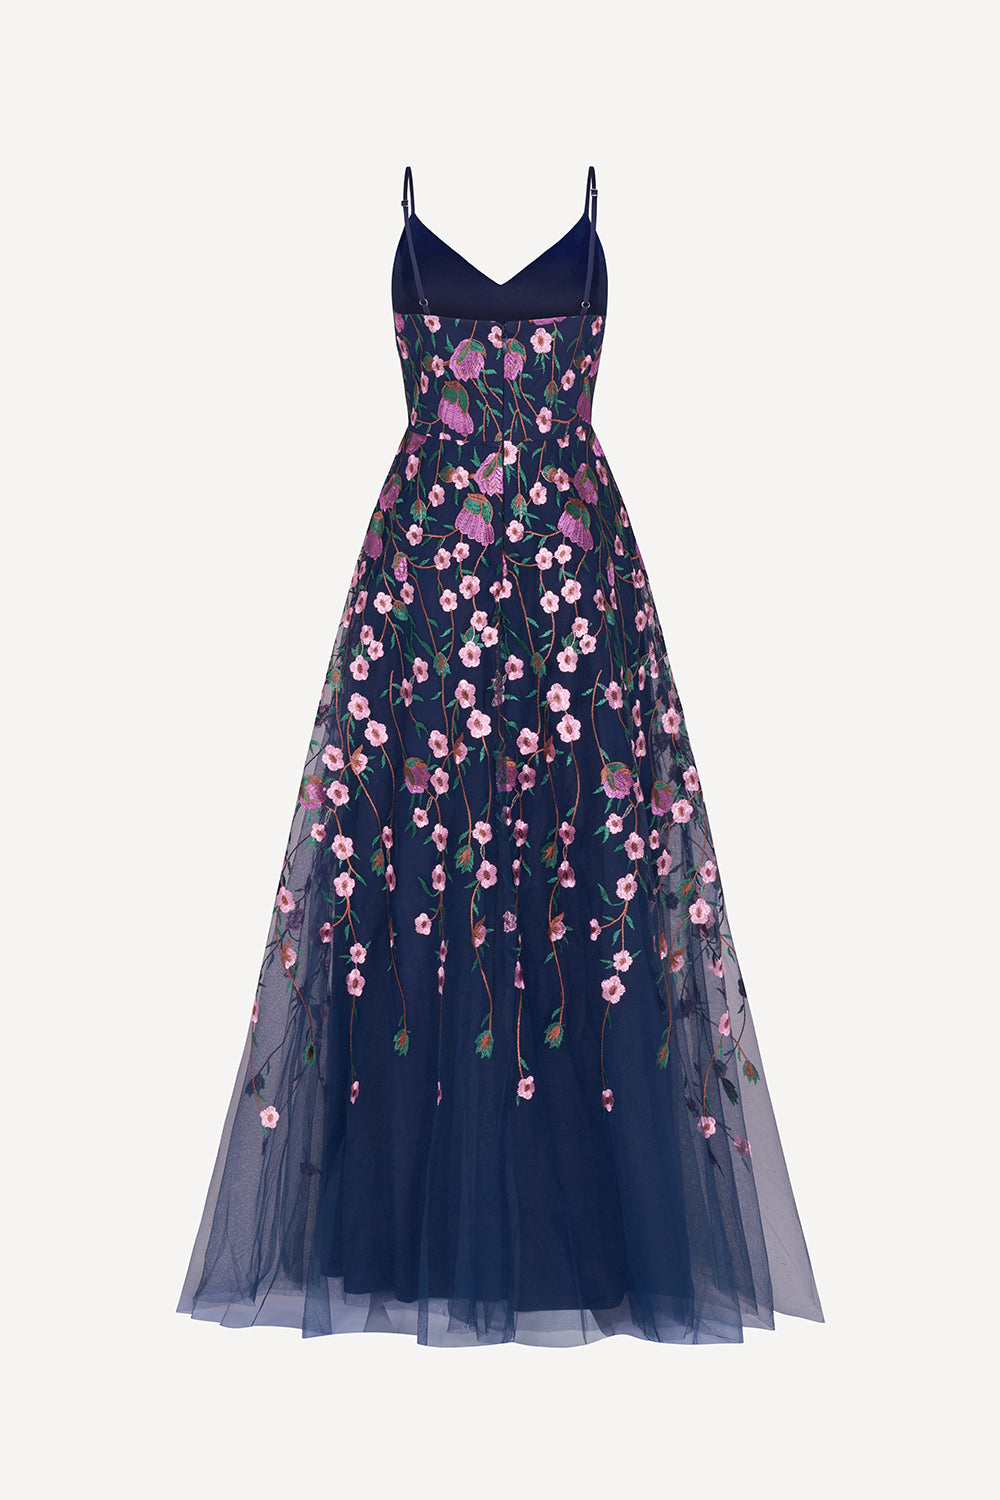 Midsummer dream tulle gown in navy